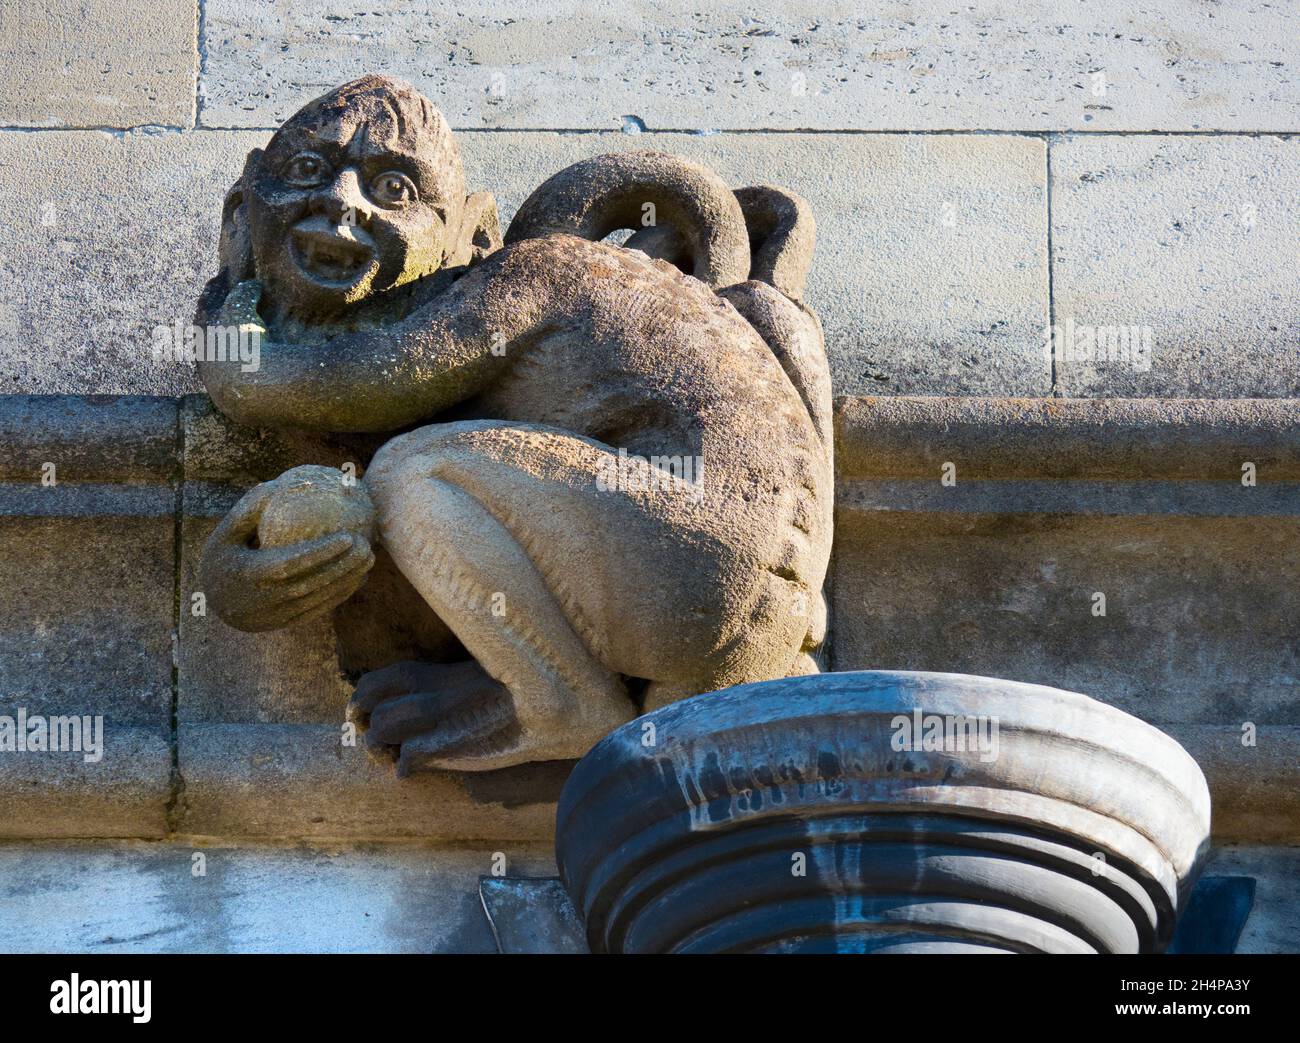 Gargoyles of Magdalen. Magdalen is one of the largest and oldest of the Oxford University Colleges. It also has its very own quirky and imaginative fa Stock Photo